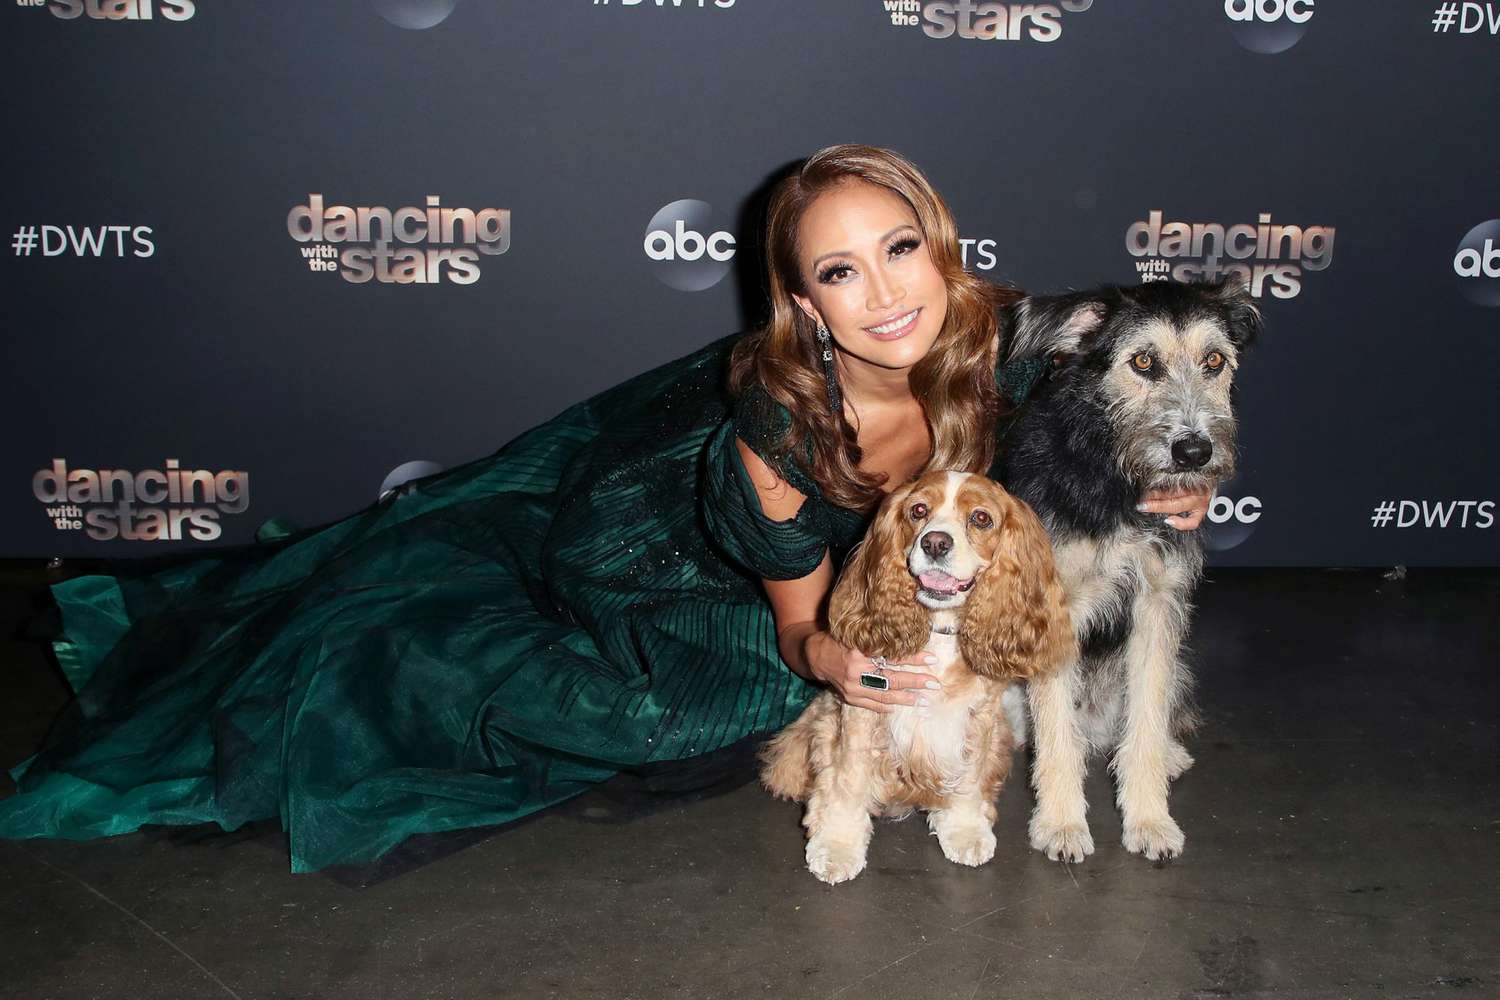 <p>Carrie Ann Inaba poses with Rose and Monte from Lady and the Tramp on the set of Dancing with the Stars season 28 on Monday at CBS Television City in L.A.</p>
                            